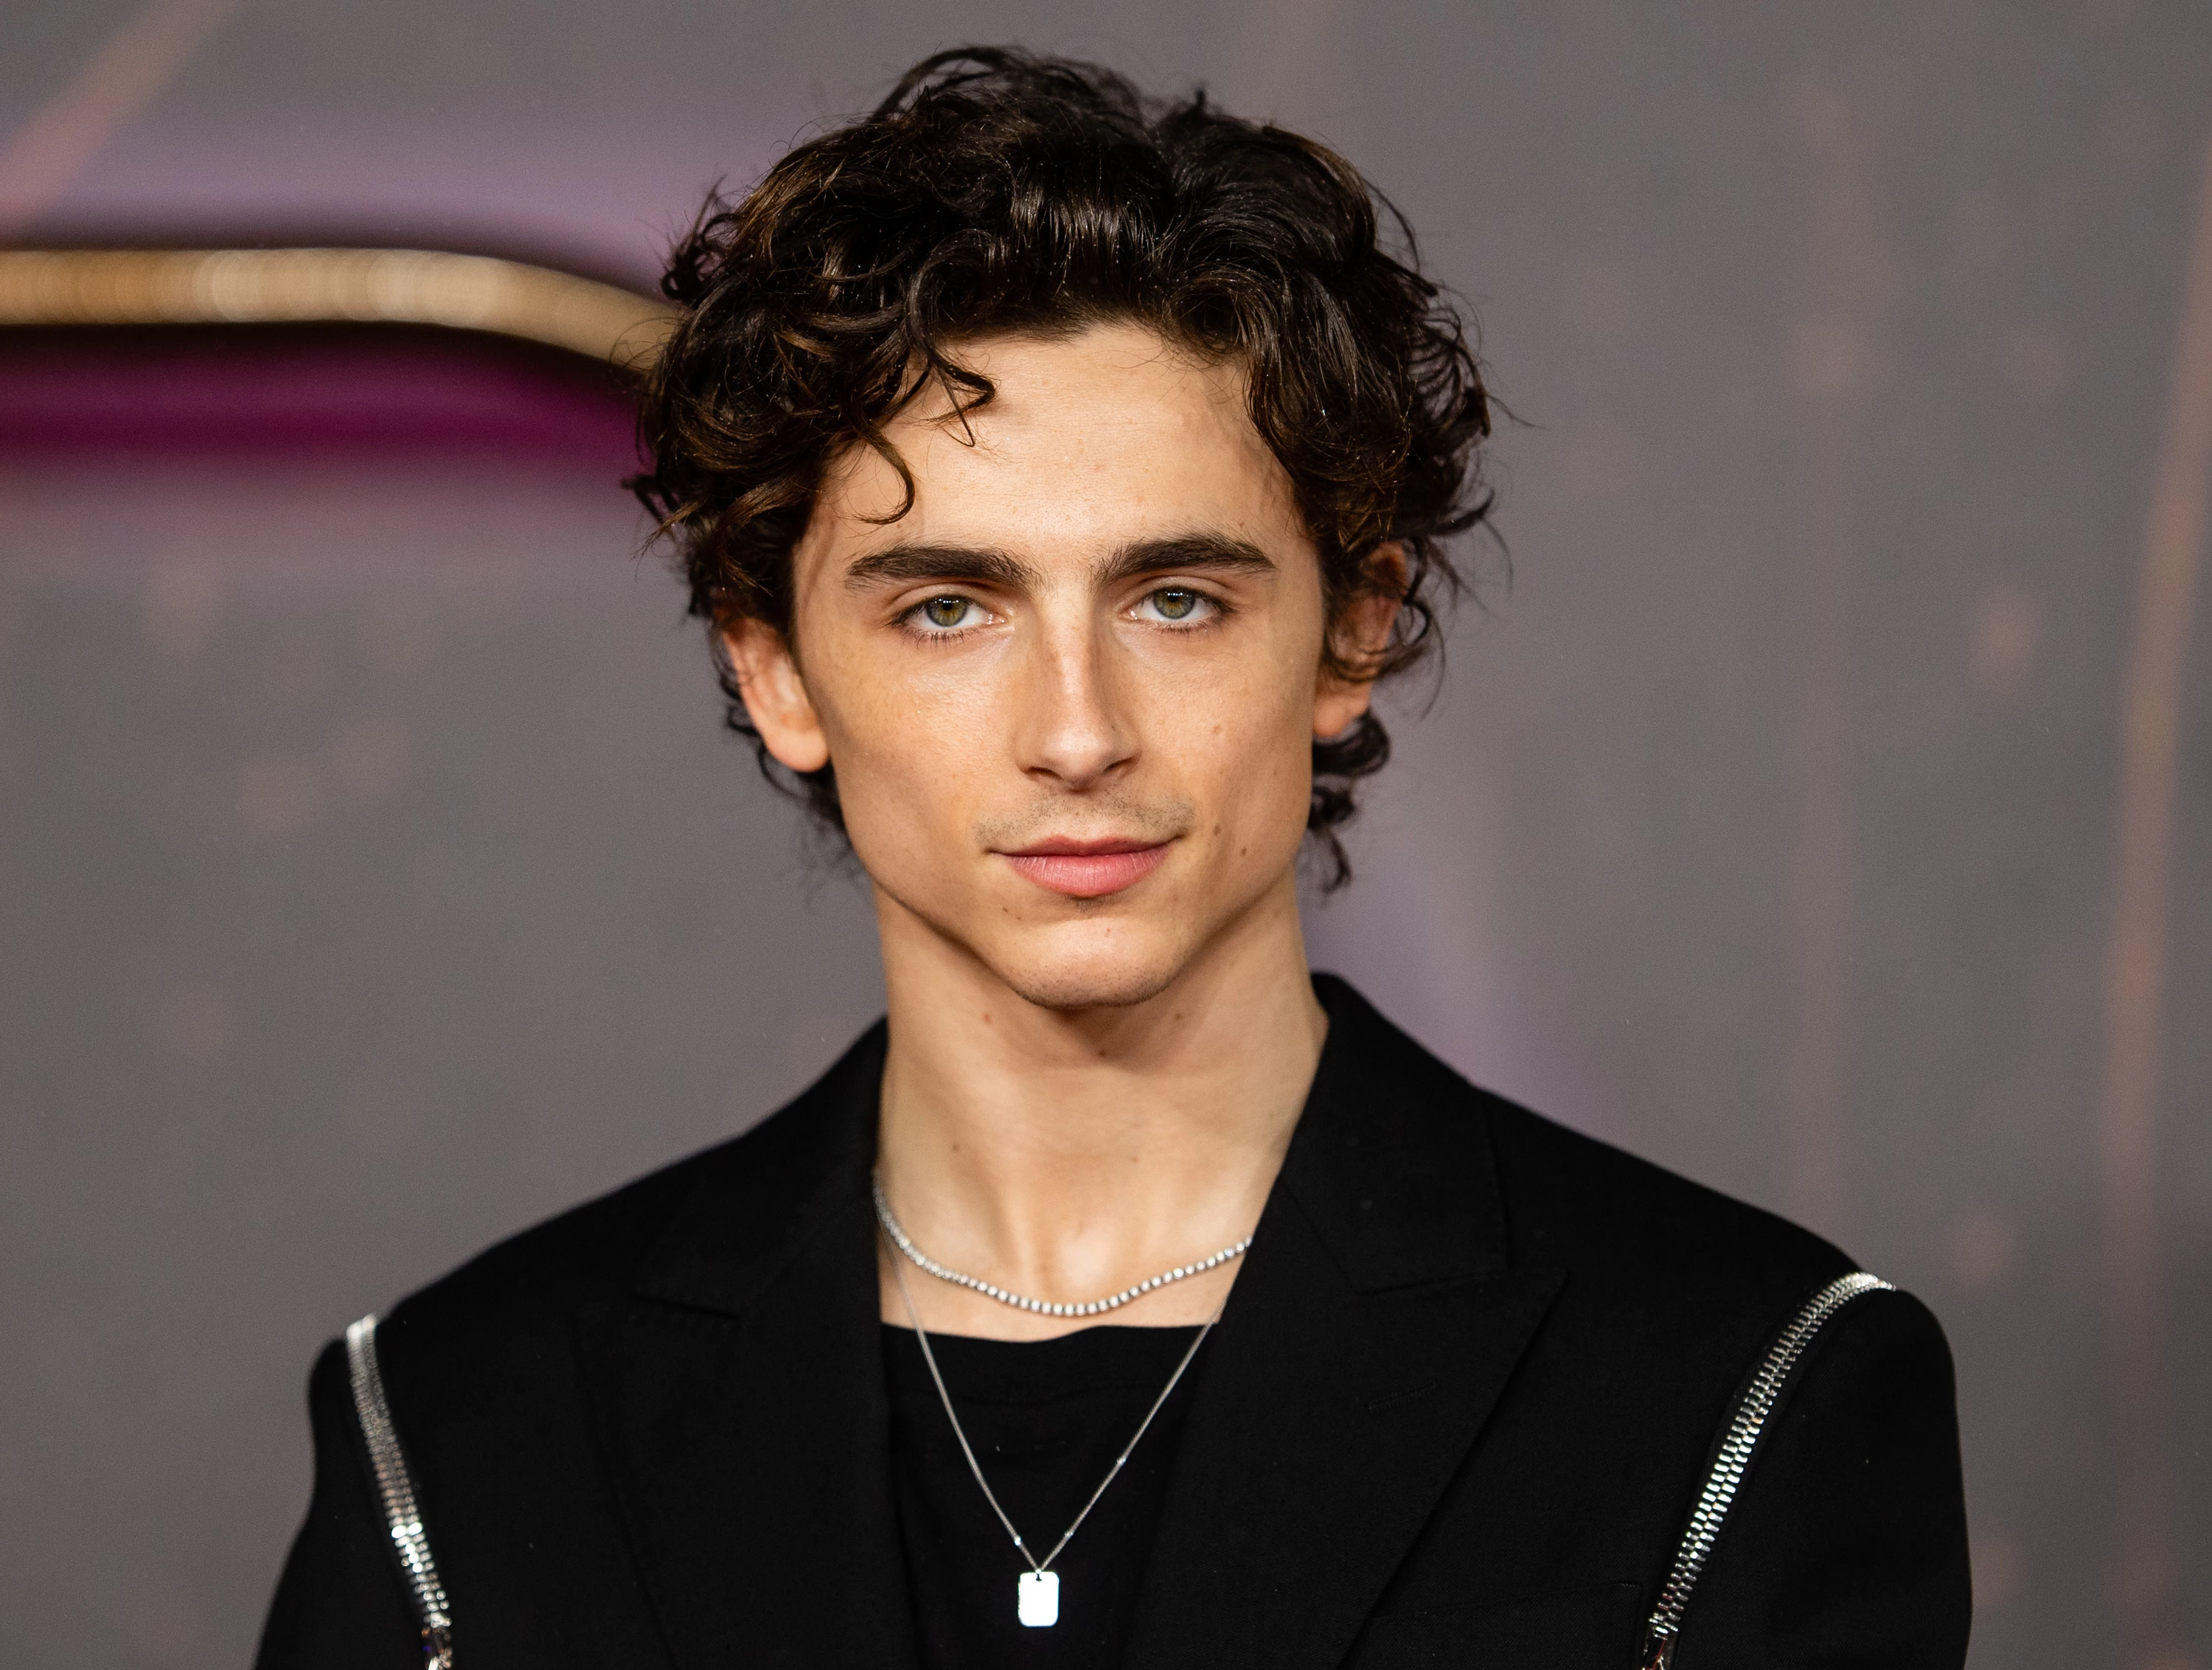 Timothée Chalamet Has More Than One Nickname, From “Timmy” To "Little Timmy Tim"